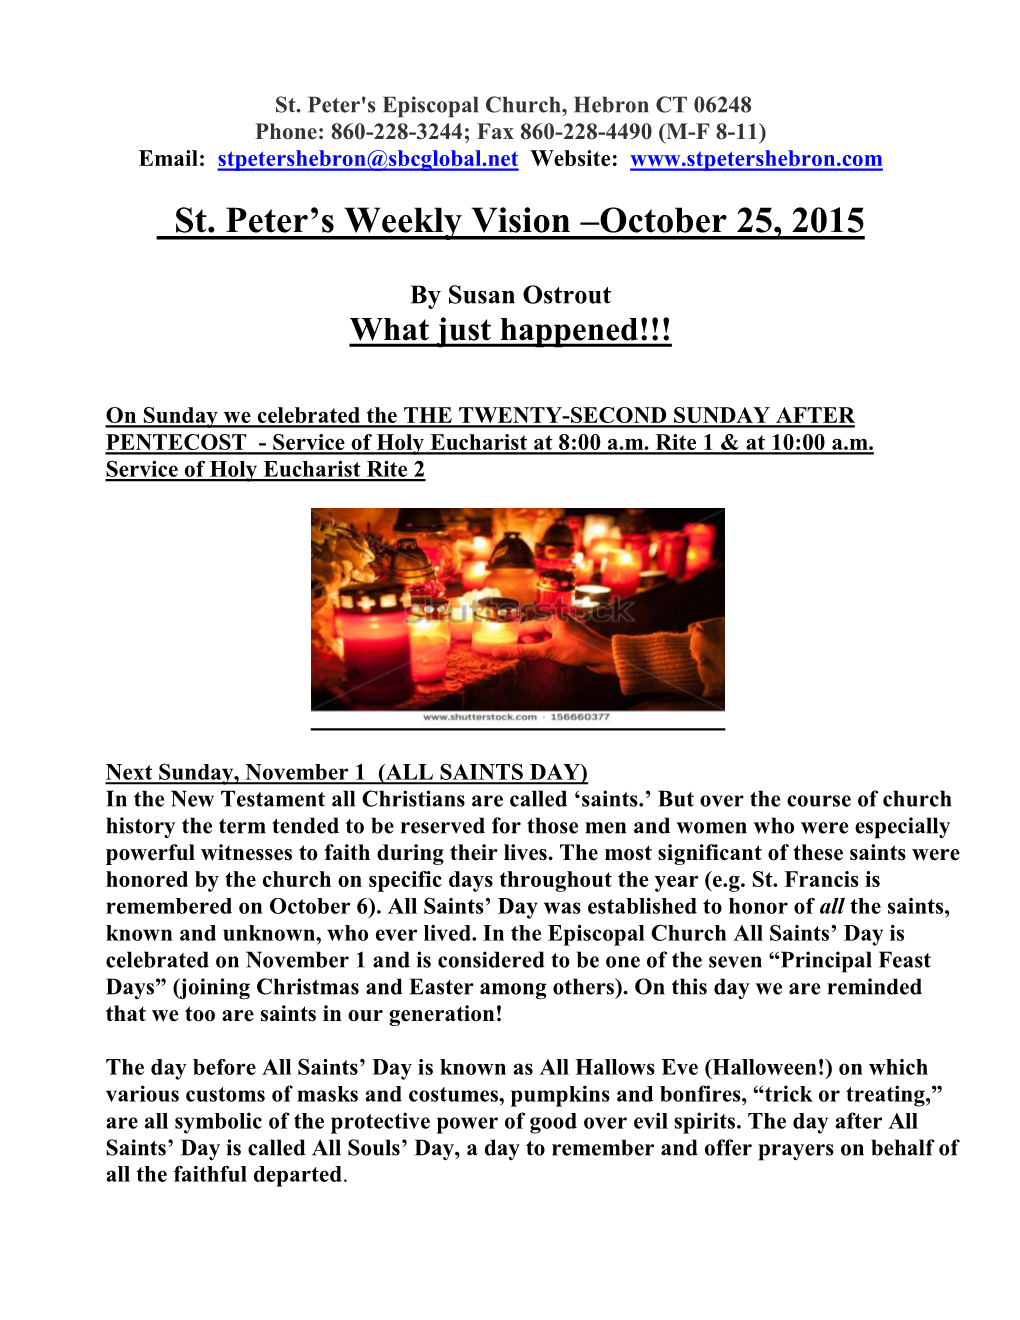 St. Peter's Weekly Vision –October 25, 2015